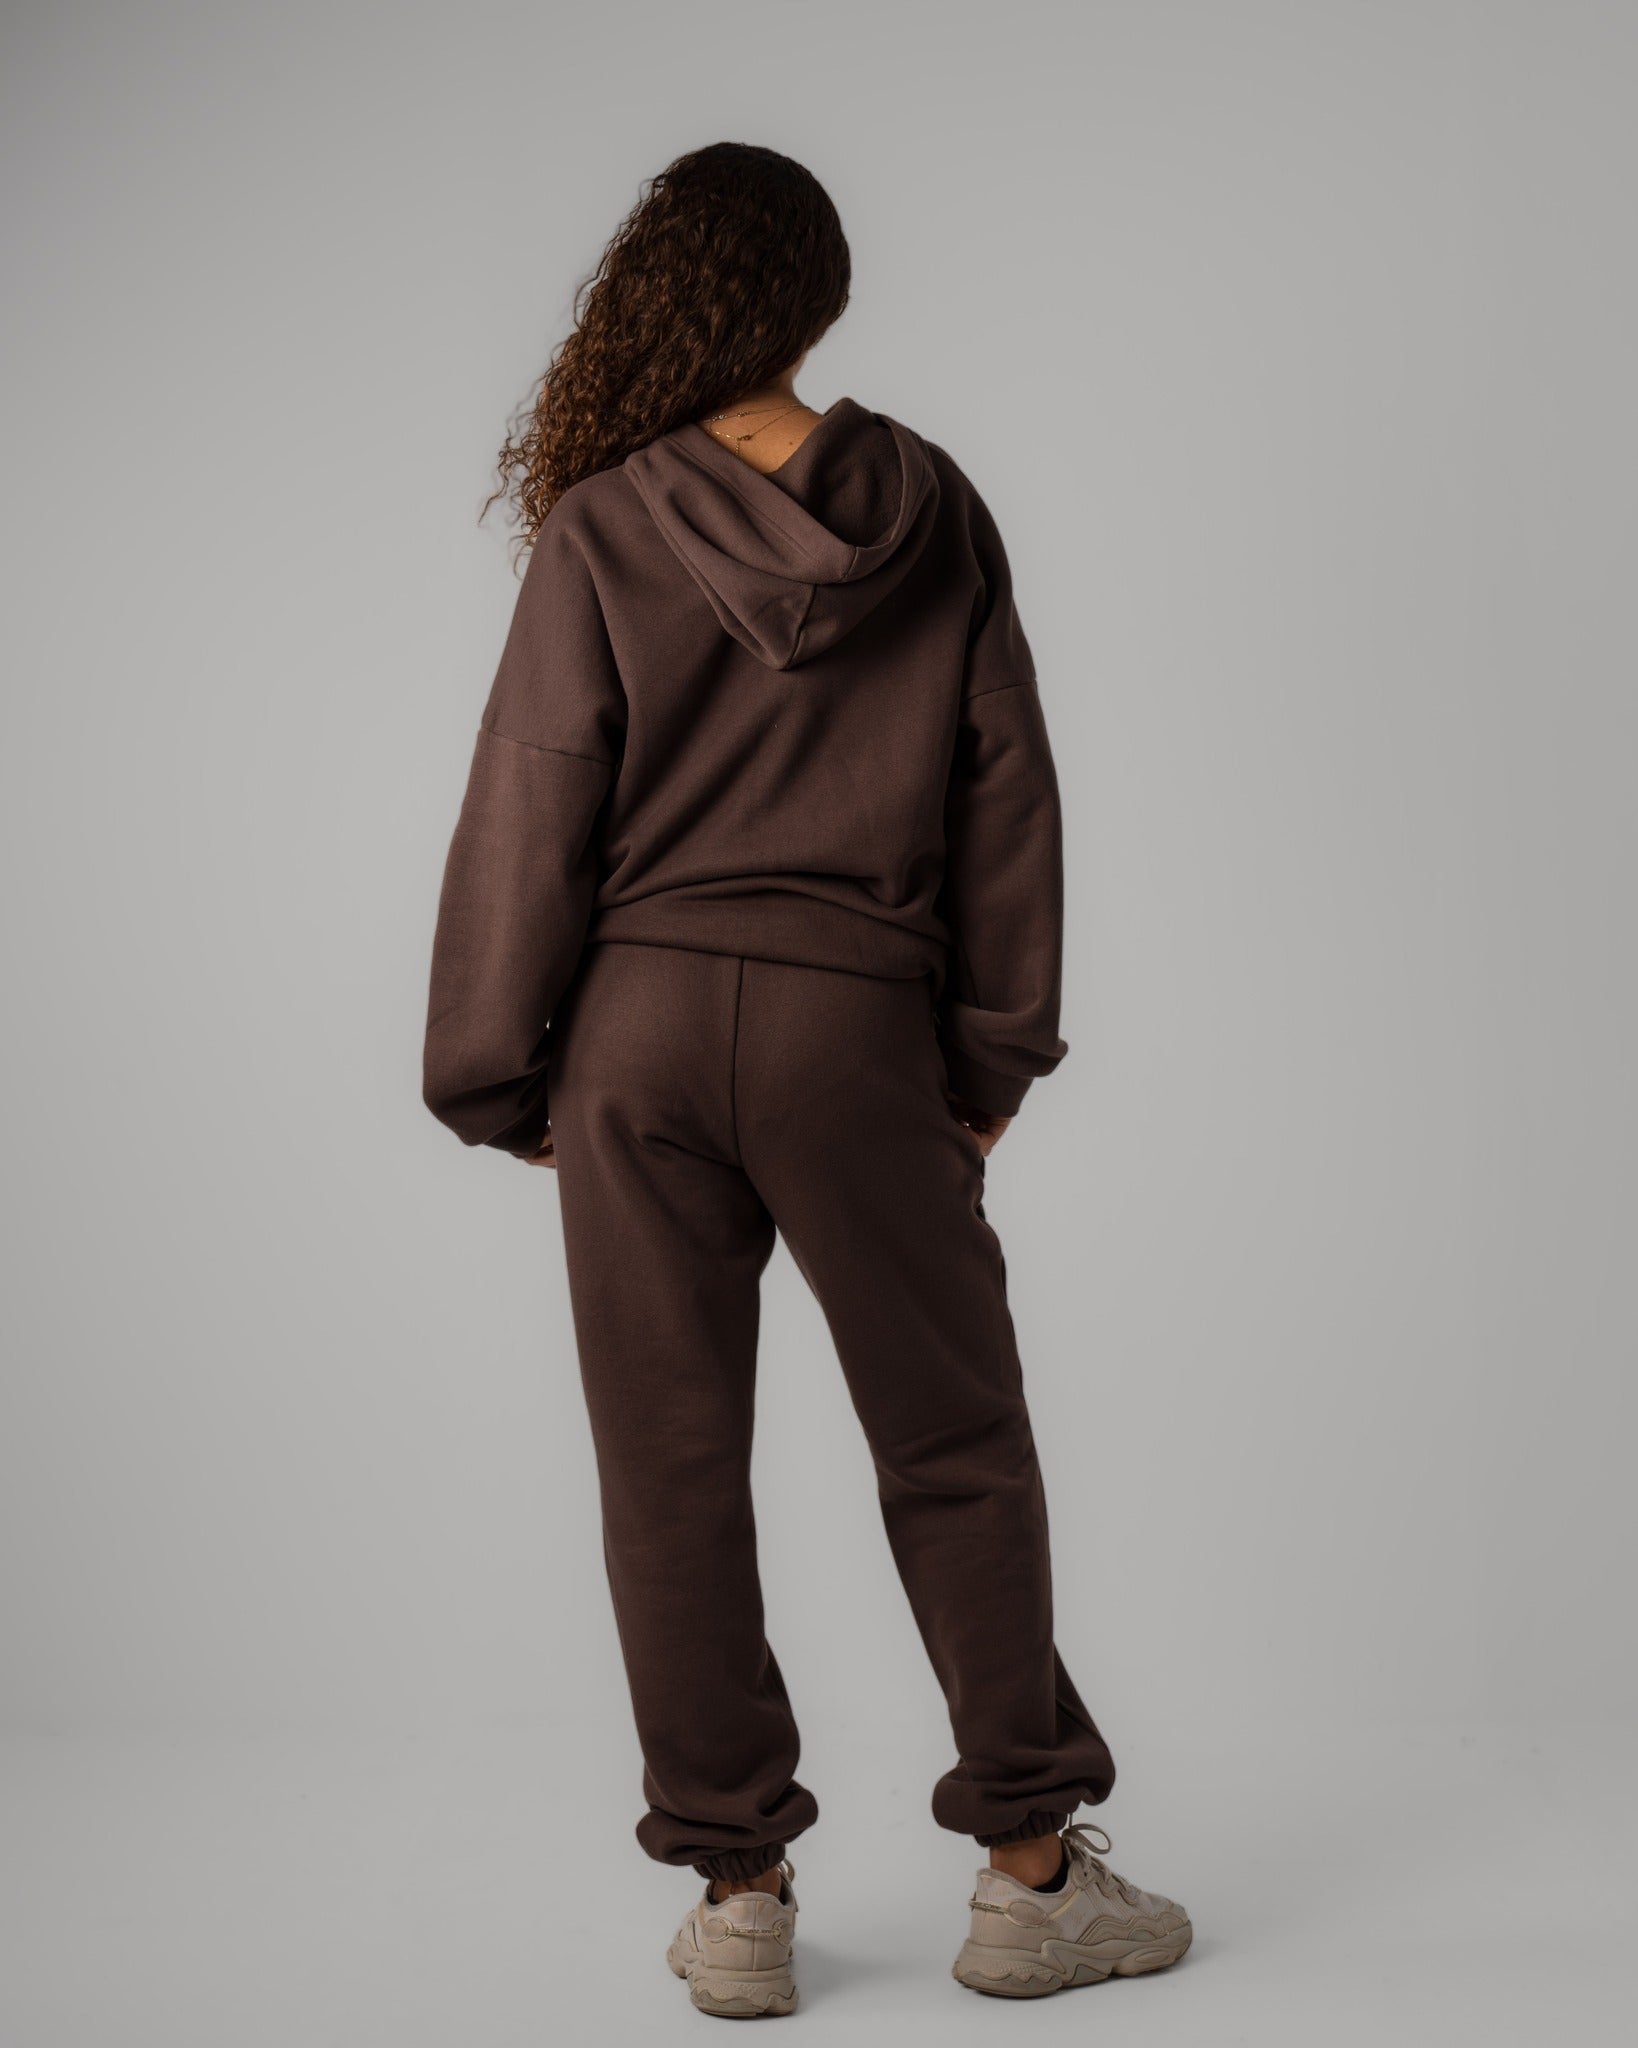 Matching set of brown Hoodie and Cuffed Jogger back view